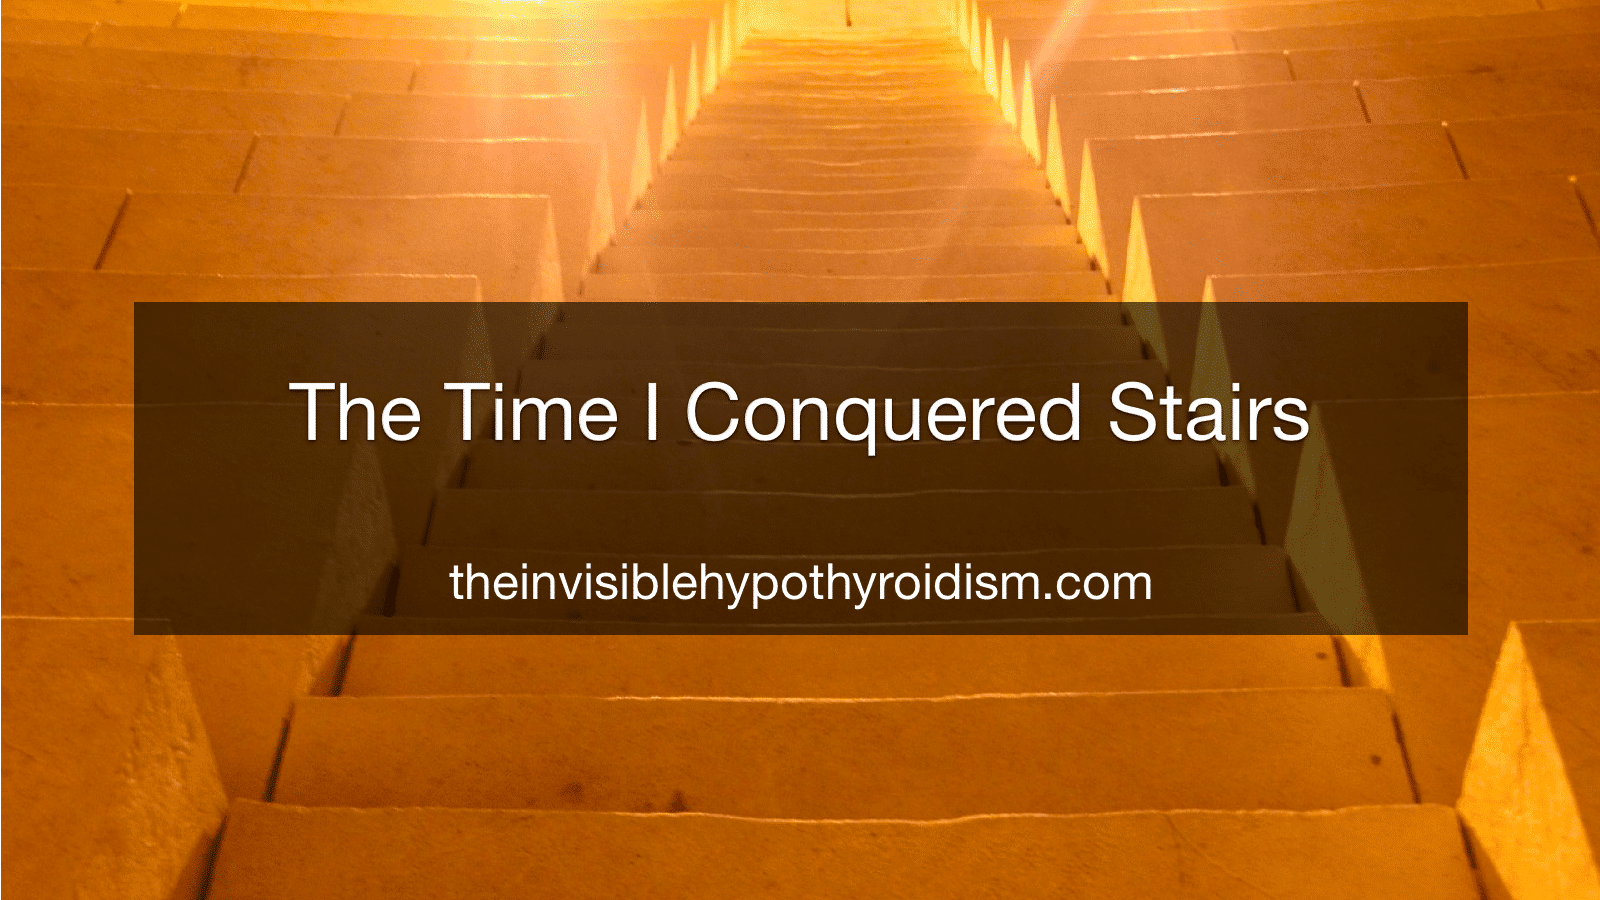 The Time I Conquered Stairs